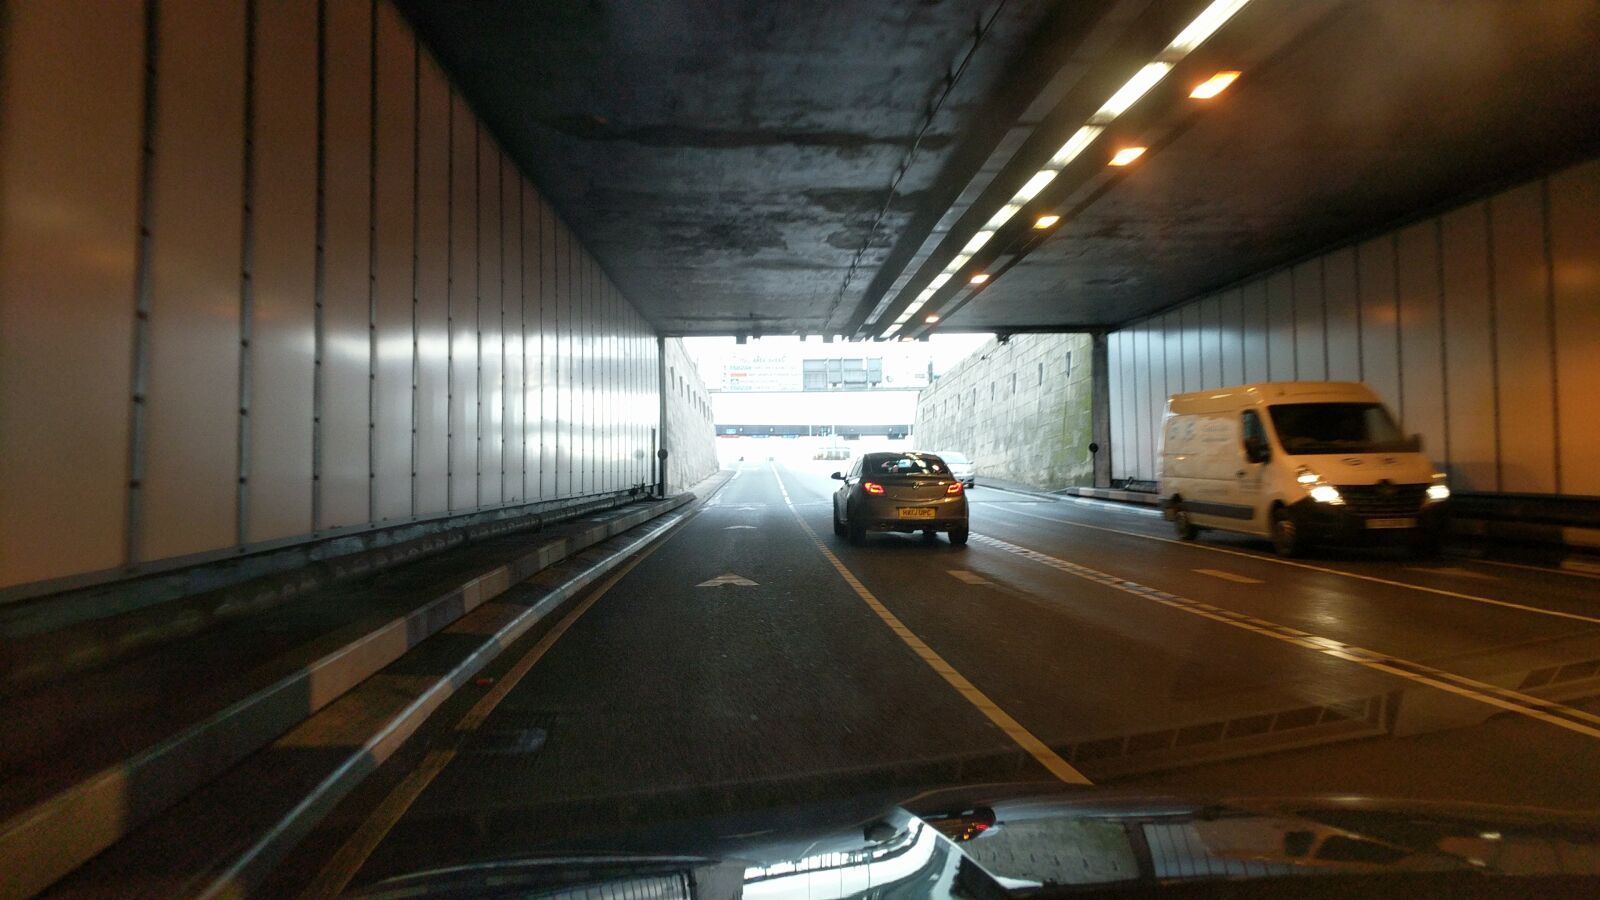 Google Pixel sample photo. Tunnel, cars, van in photography